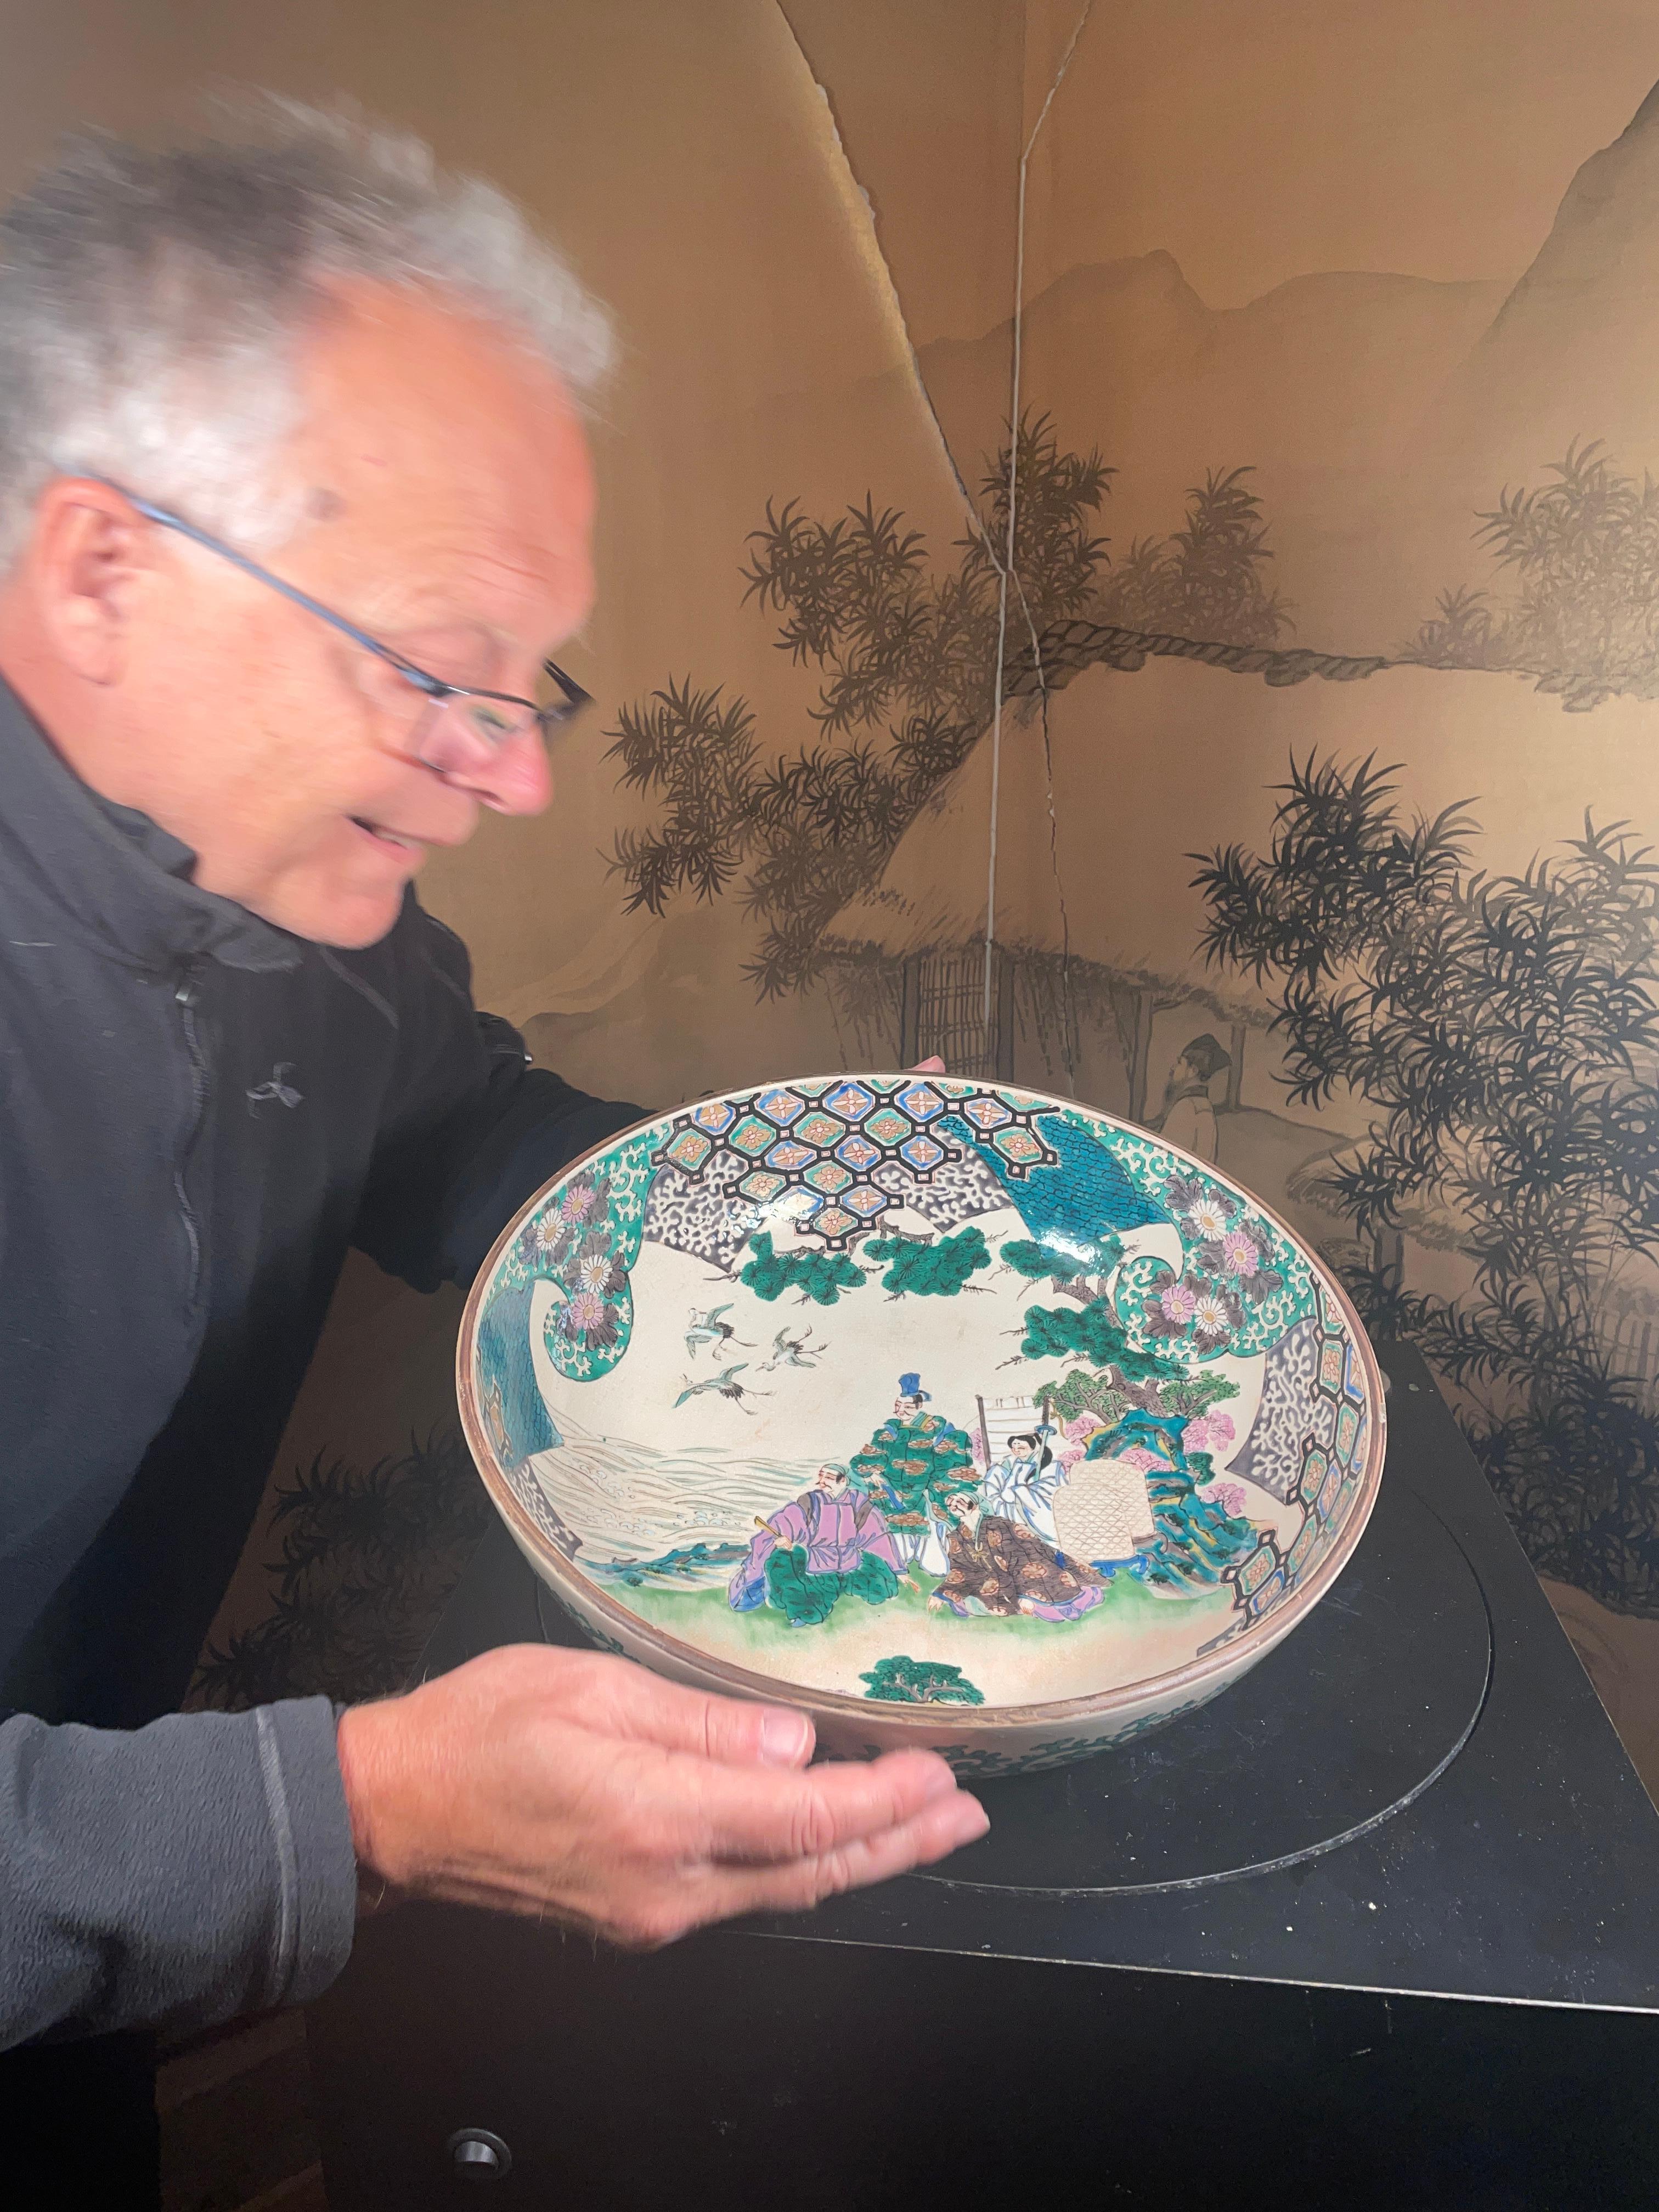 From our recent Japanese Acquisition Travels- a big and lovely big 13 inch diameter hand painted bowl from Japan.

Japan hard to find early hand painted ceramic lush 